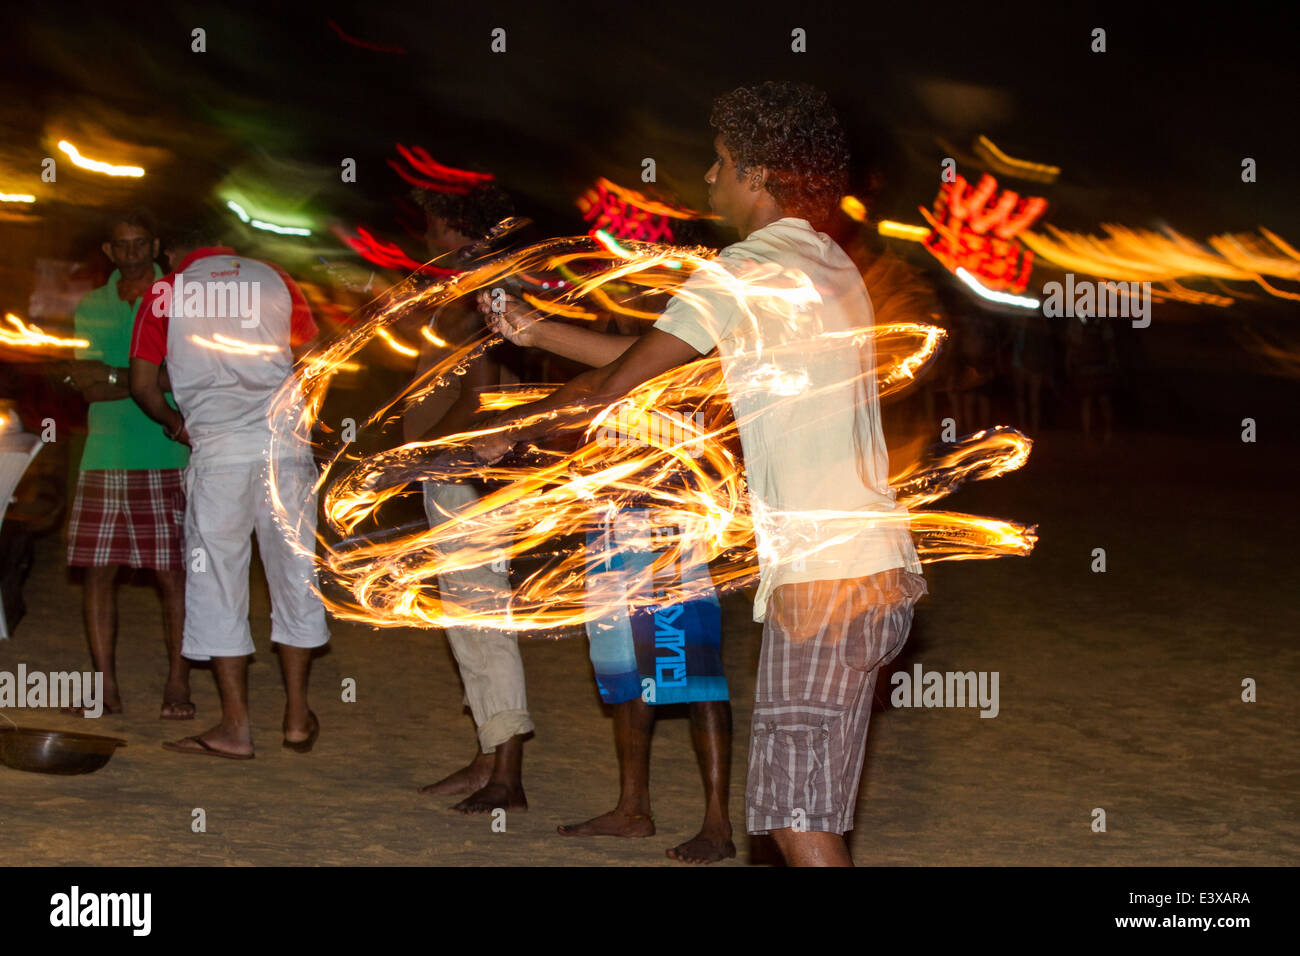 Fire Dancer A fire dancer performs tricks and entertains night time tourist diners on Mirissa beach in Sri Lanka Stock Photo